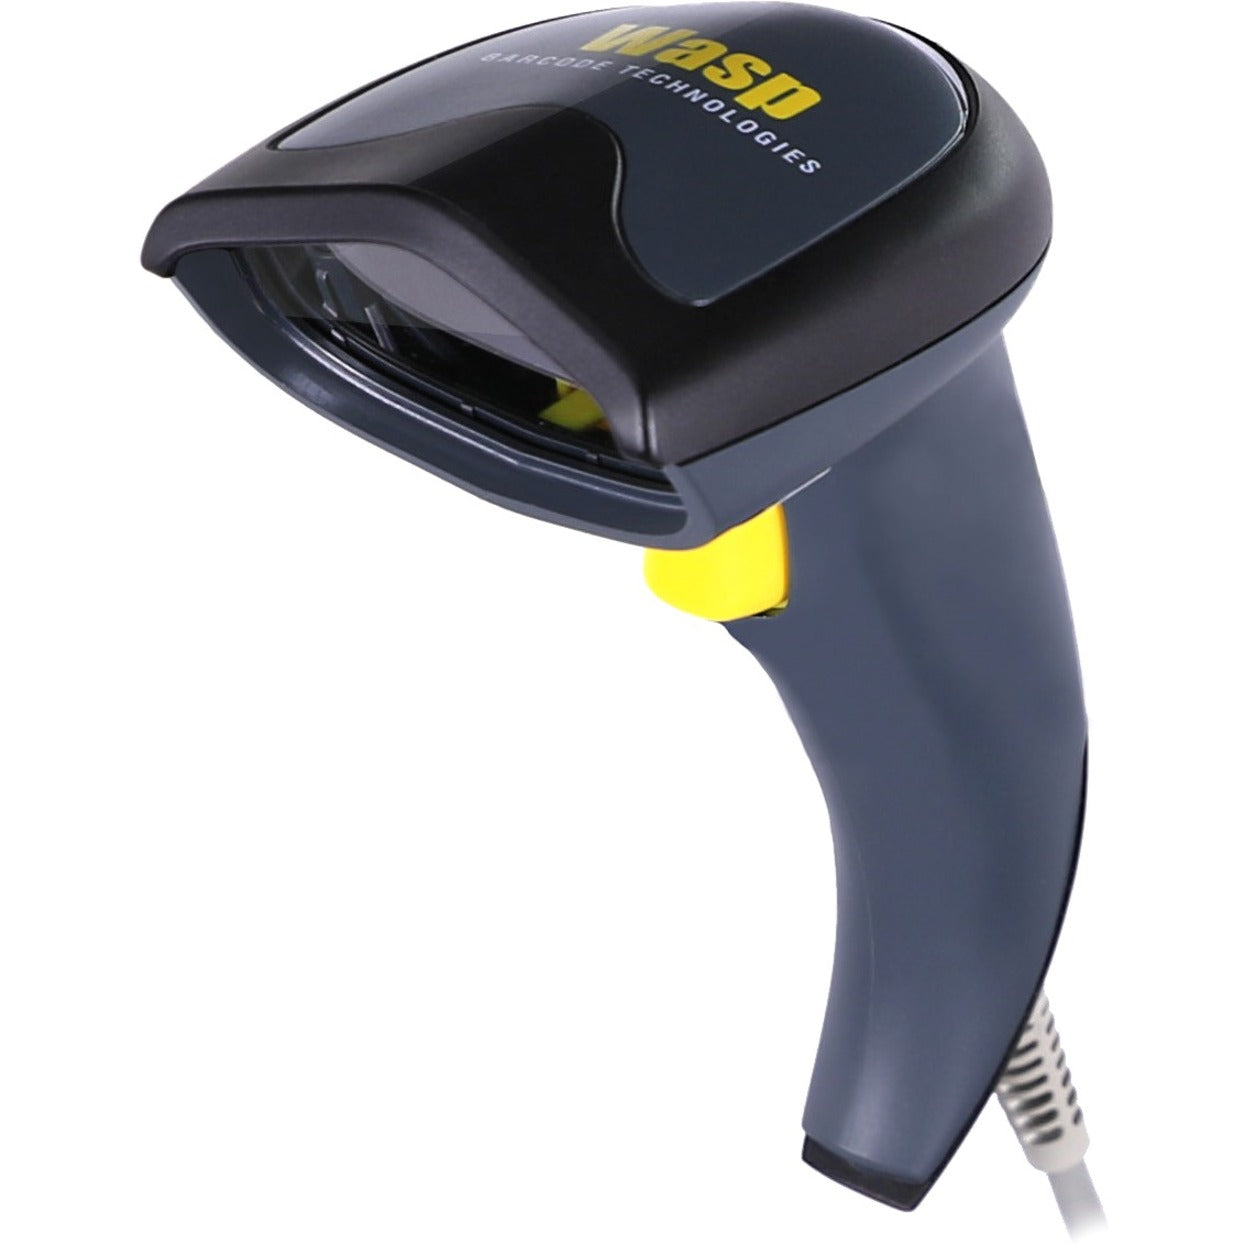 Wasp 633809002847 WDI4200 2D Barcode Scanner, USB, Imager, Black, 2 Year Warranty